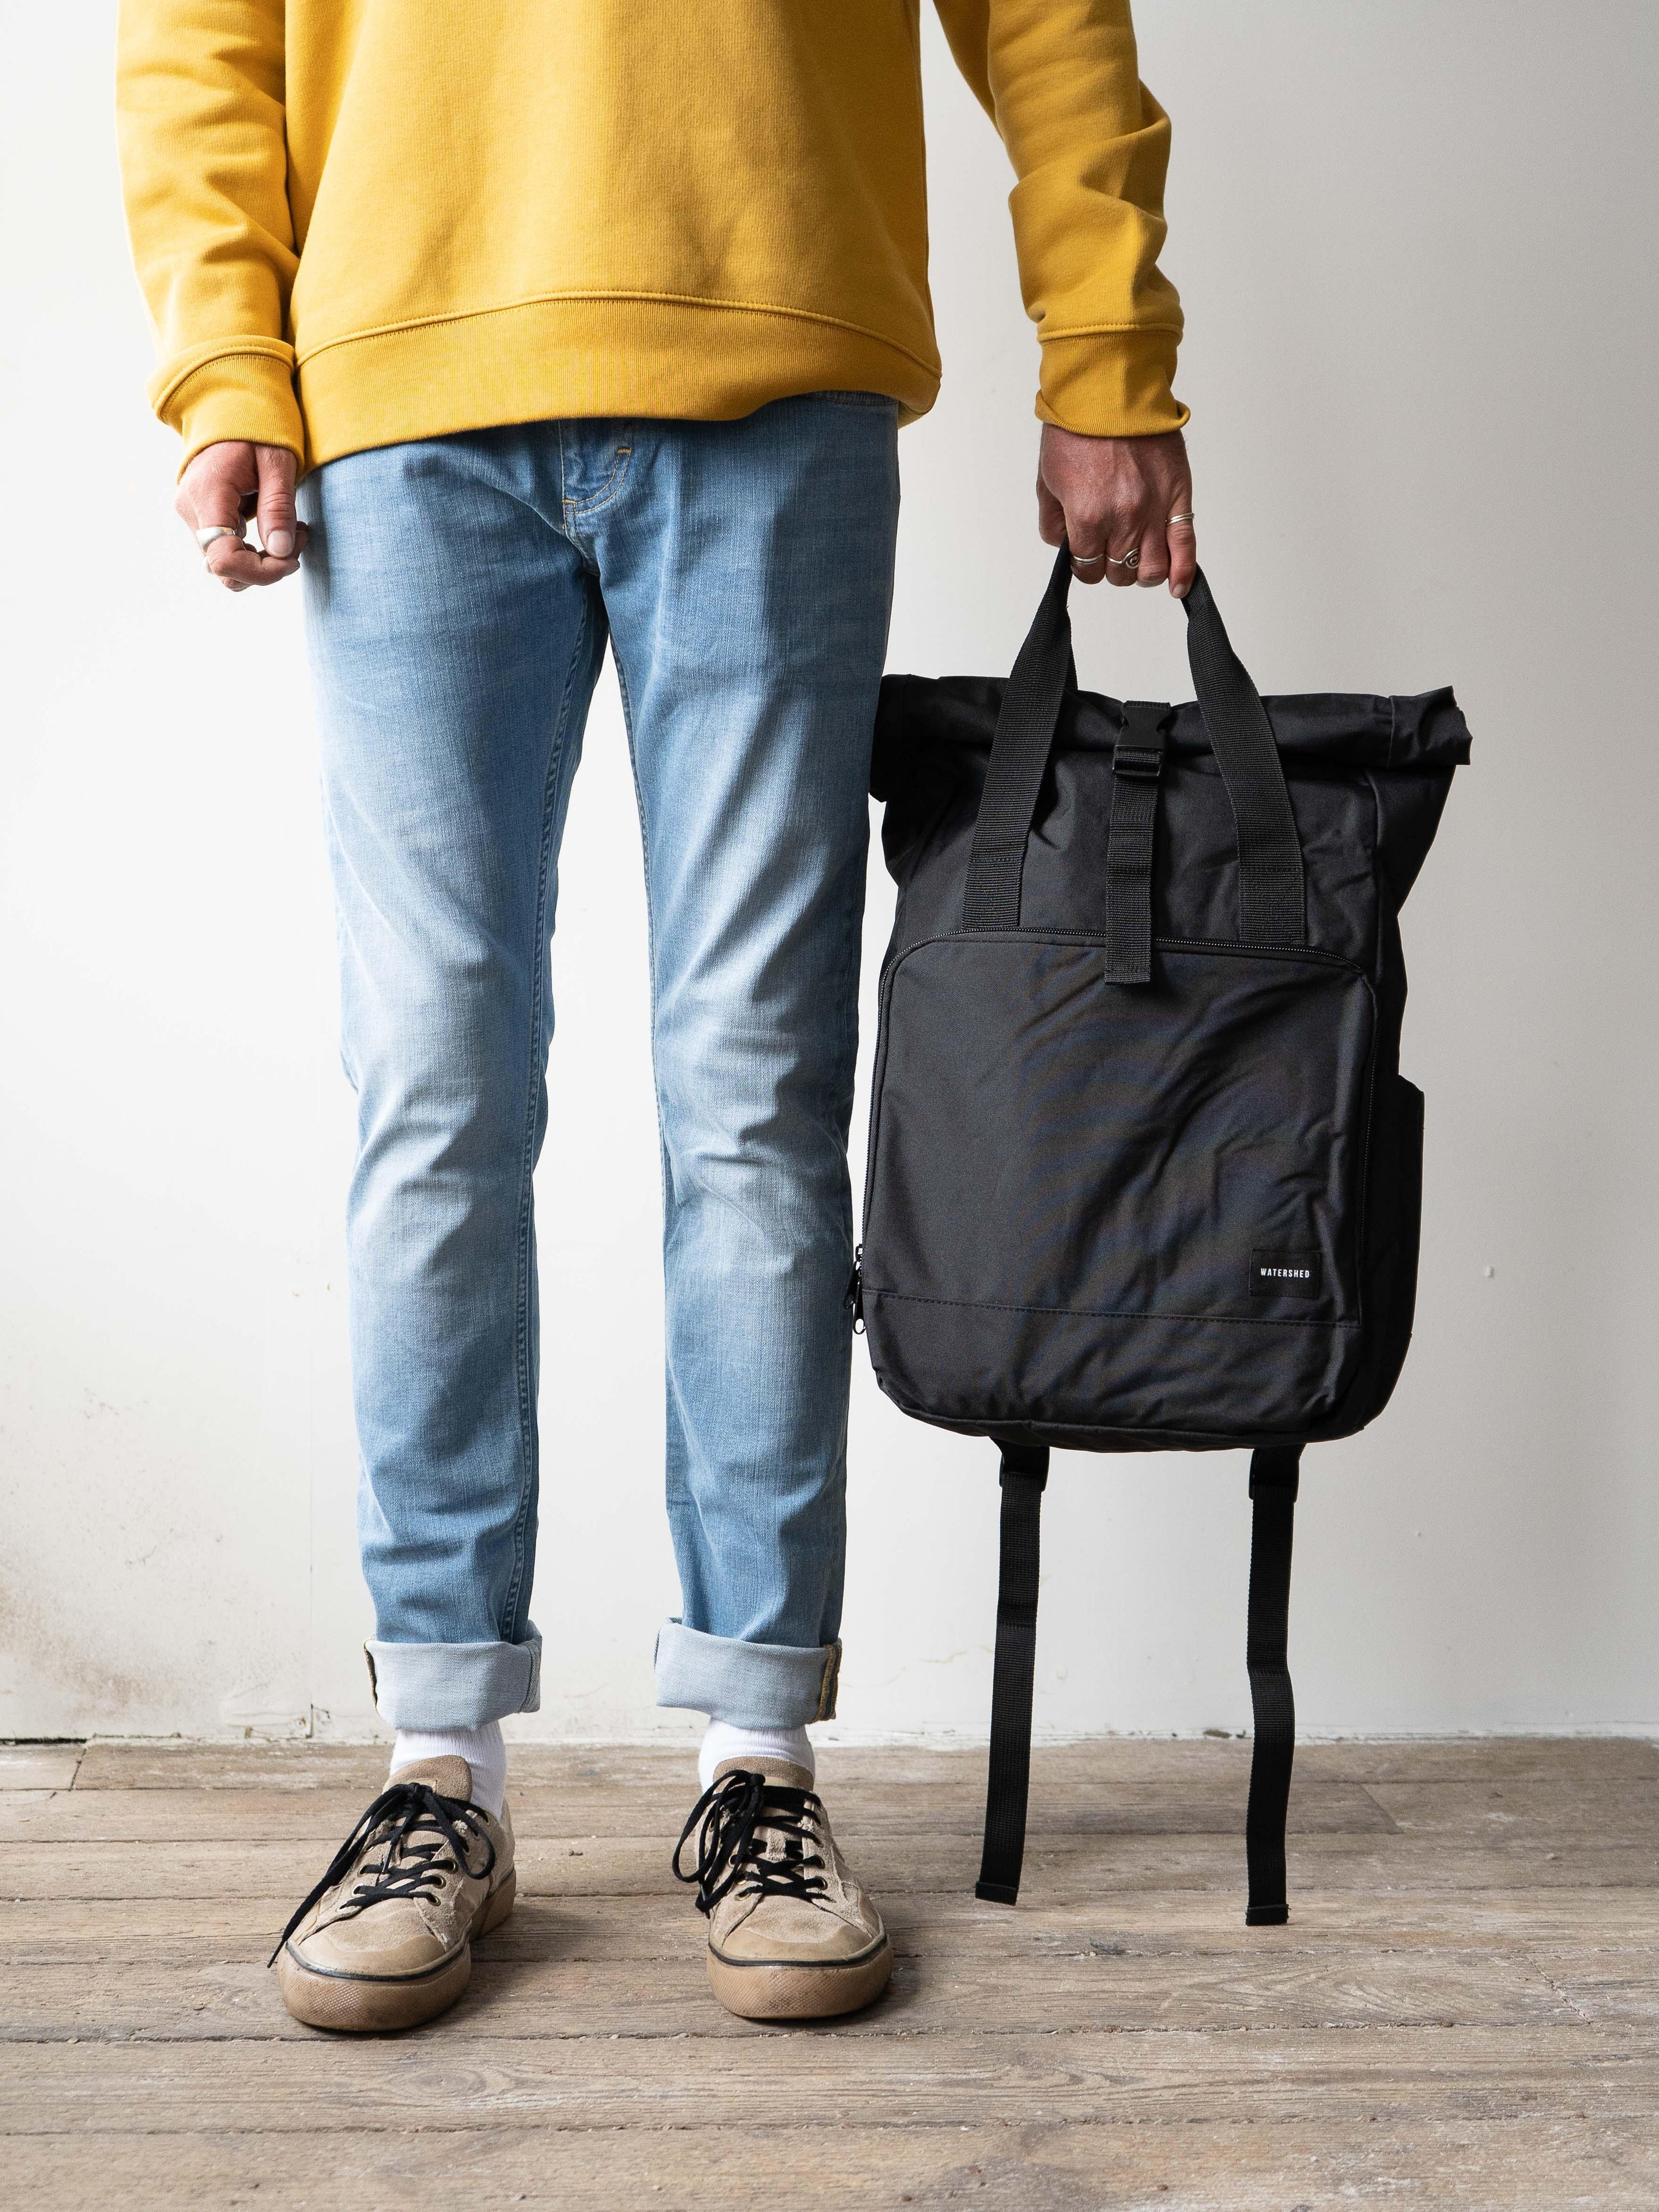 Recycled Shelter Backpack 2.0 - Black - Watershed Brand